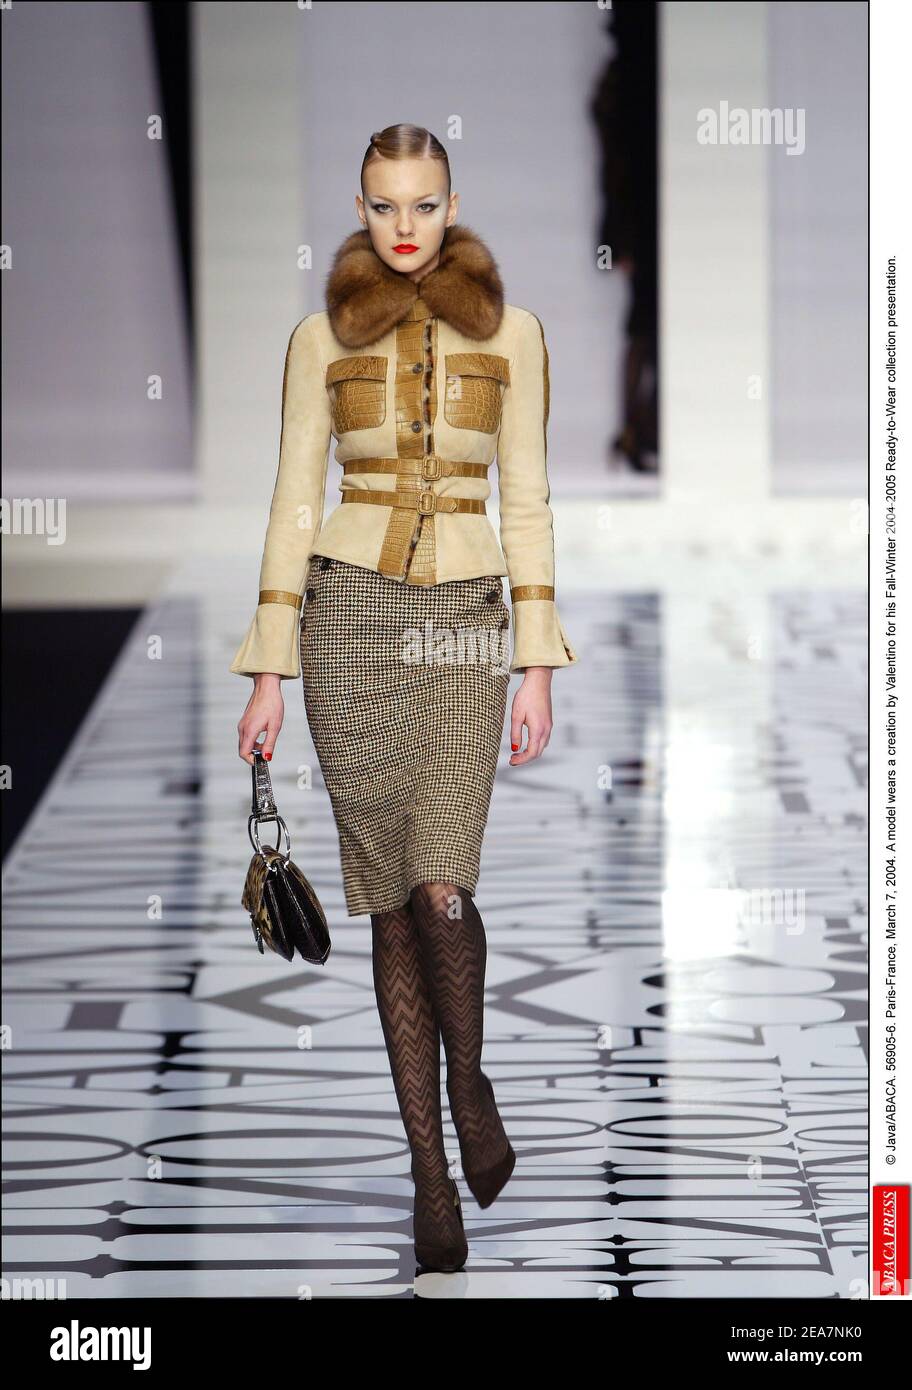 © Java/ABACA. 56905-6. Paris-France, March 7, 2004. A model wears a creation by Valentino for his Fall-Winter 2004-2005 Ready-to-Wear collection presentation. Stock Photo